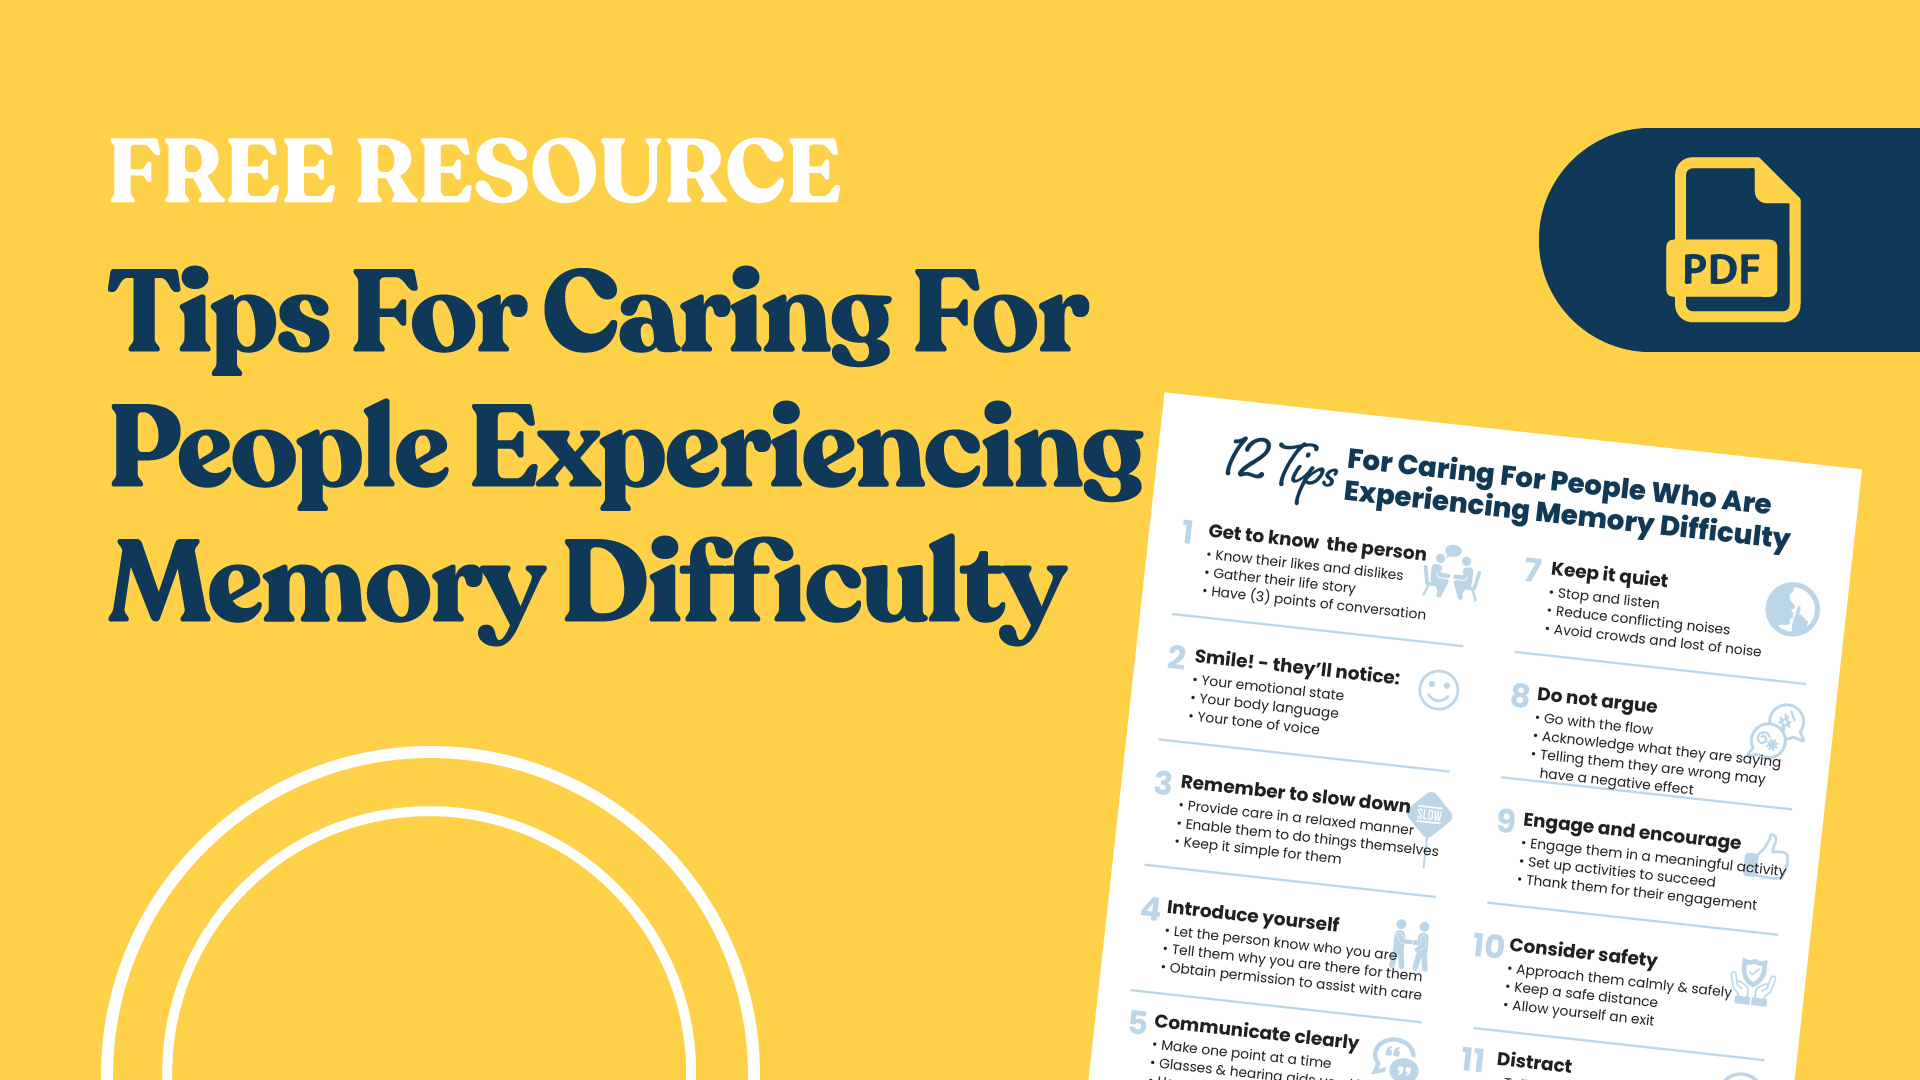 Featured image for Tips For Caring For People Experiencing memory Difficulty blog post